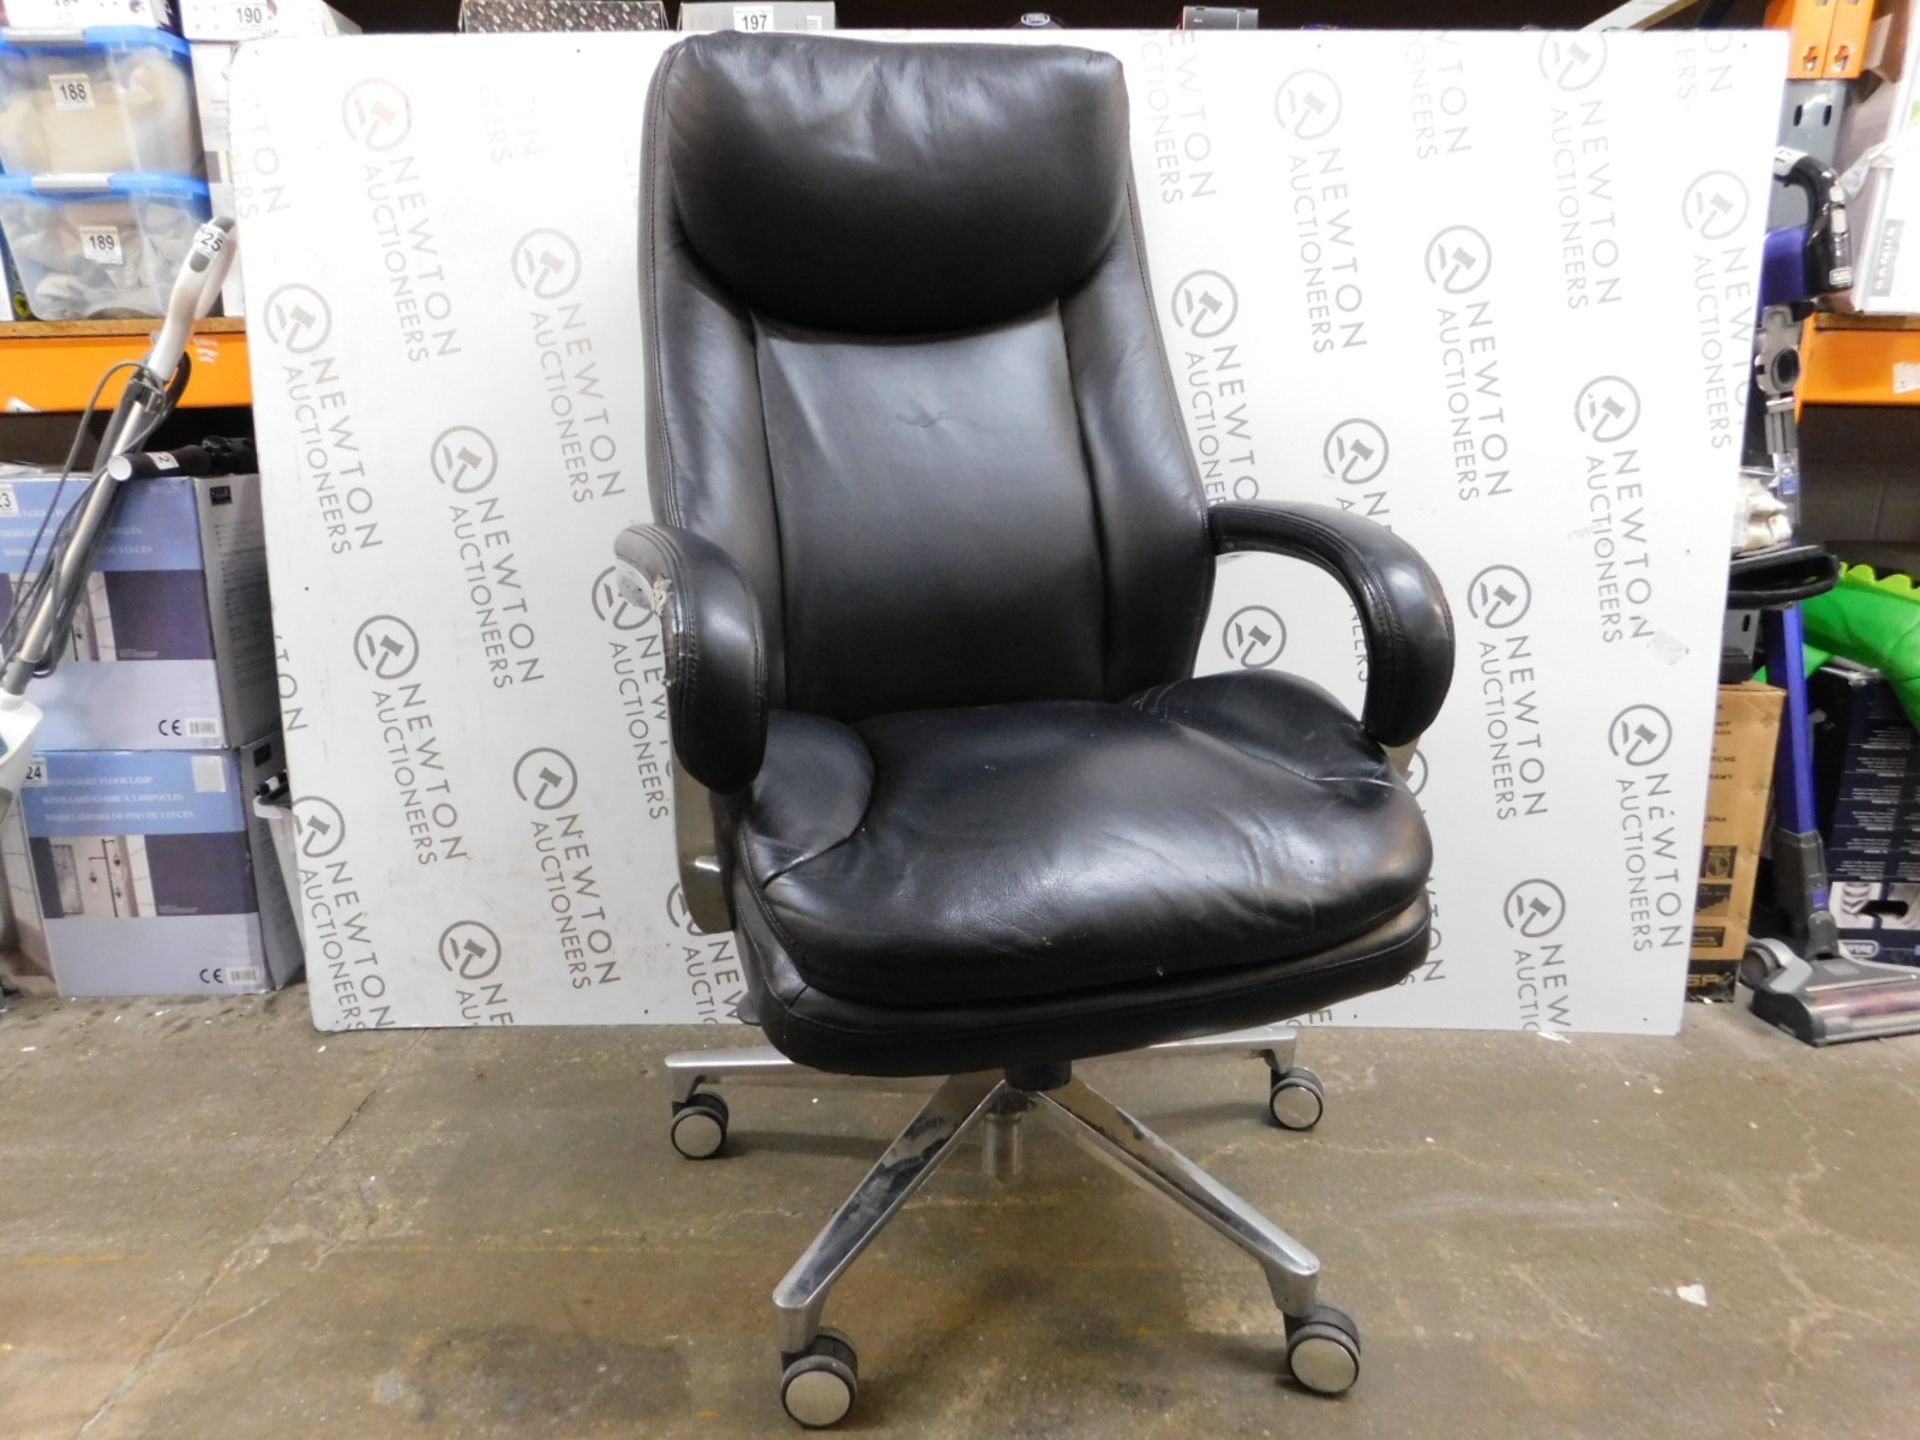 1 LA-Z-BOY EXECUTIVE BLACK LEATHER OFFICE CHAIR RRP Â£299 (RIPS ON ARMRESTS)